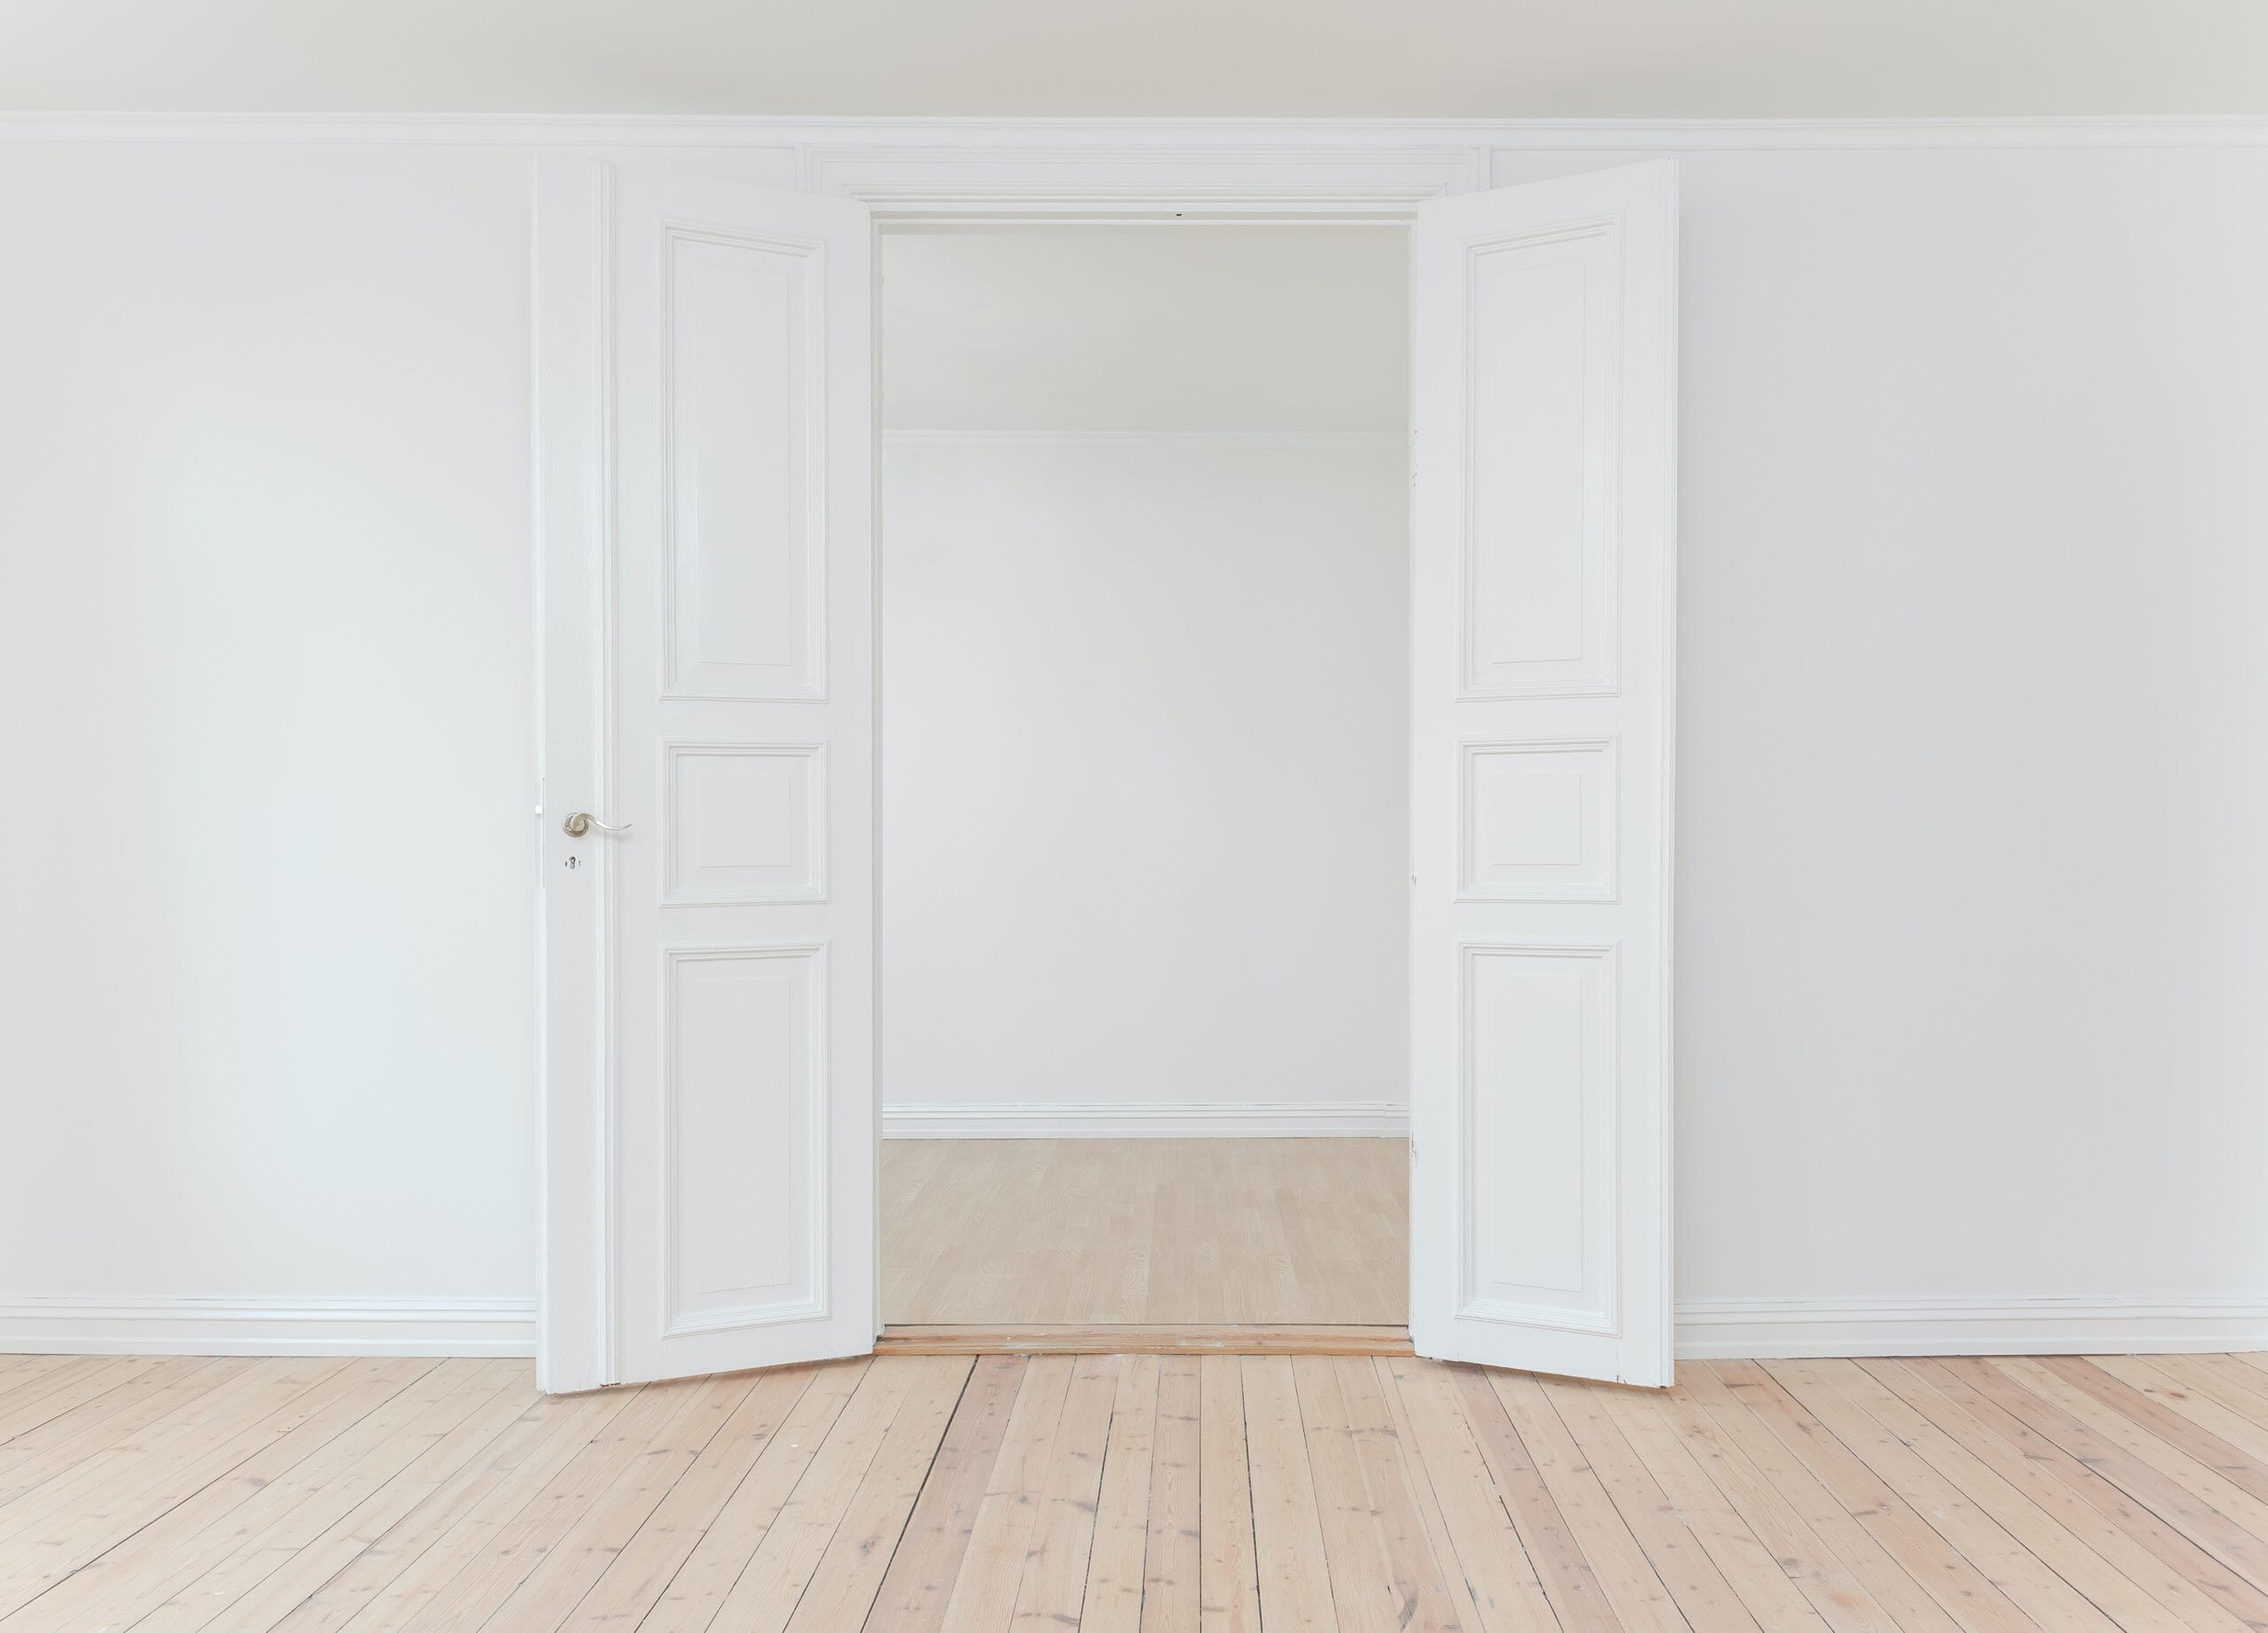 Empty room with wood floors and two white 3 panel doors open